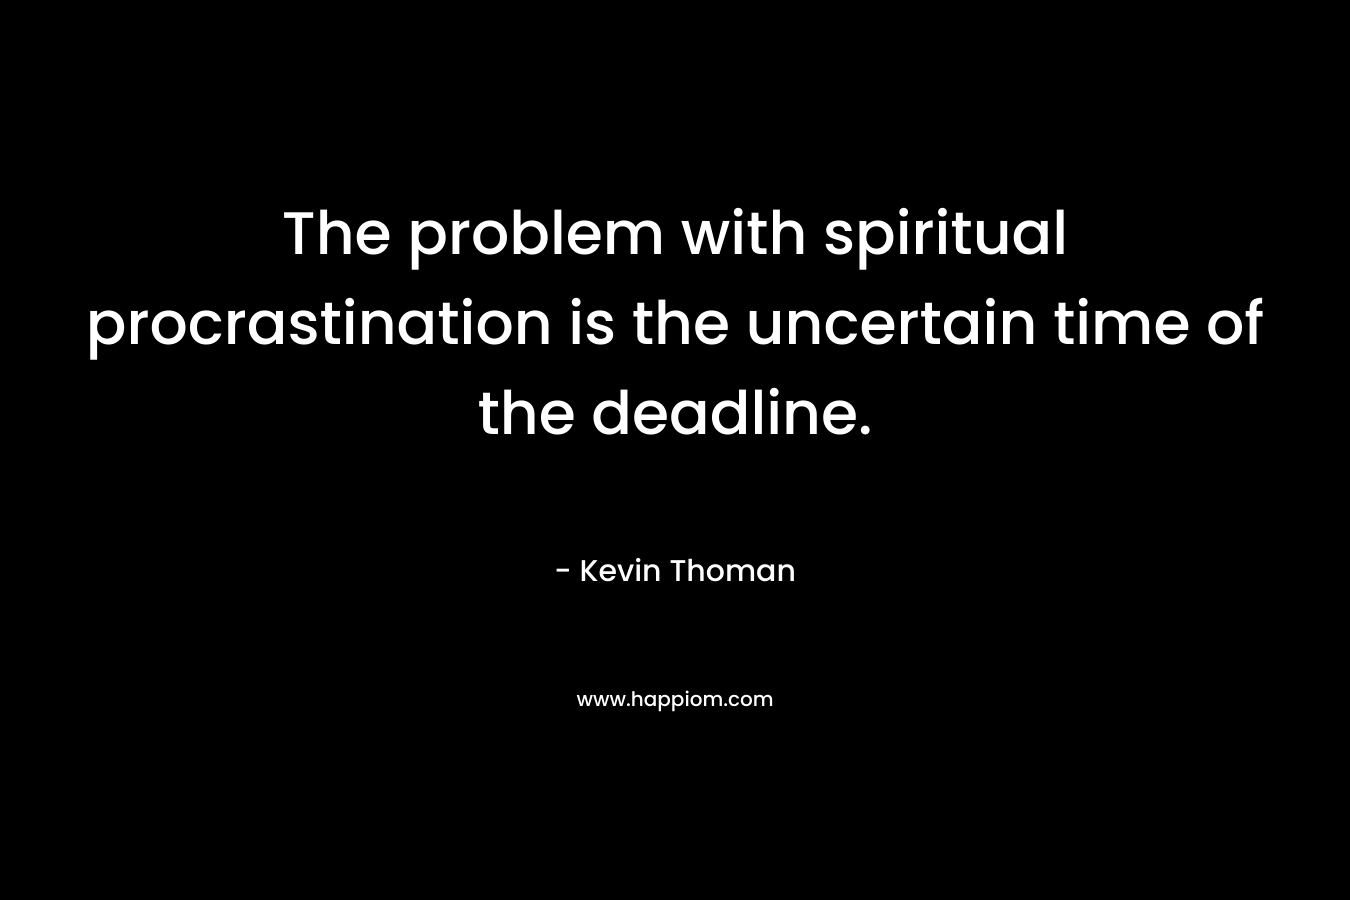 The problem with spiritual procrastination is the uncertain time of the deadline.